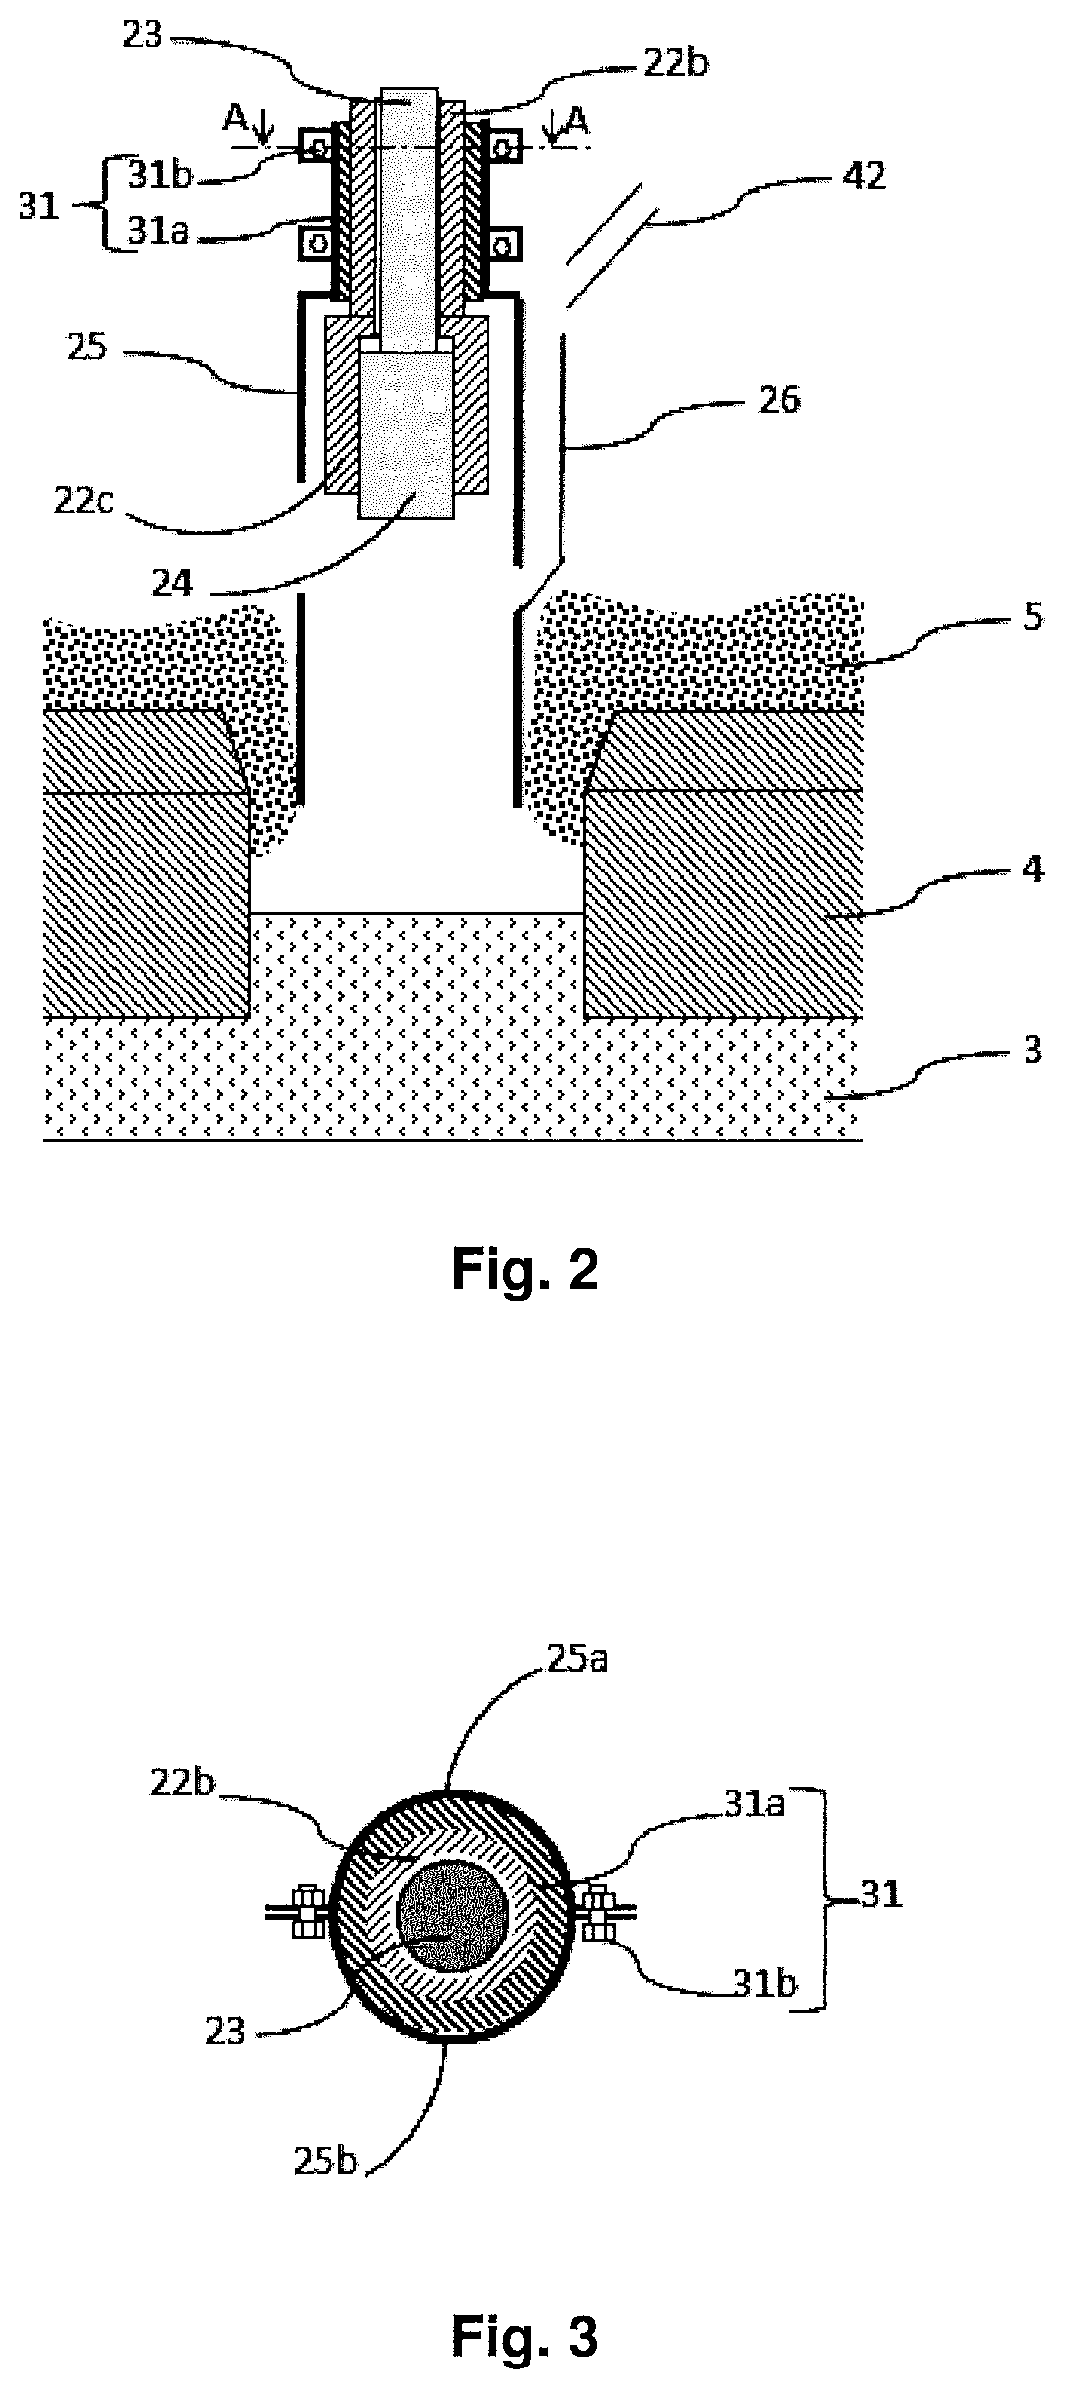 Drilling device comprising a tubular sheath secured to an actuator